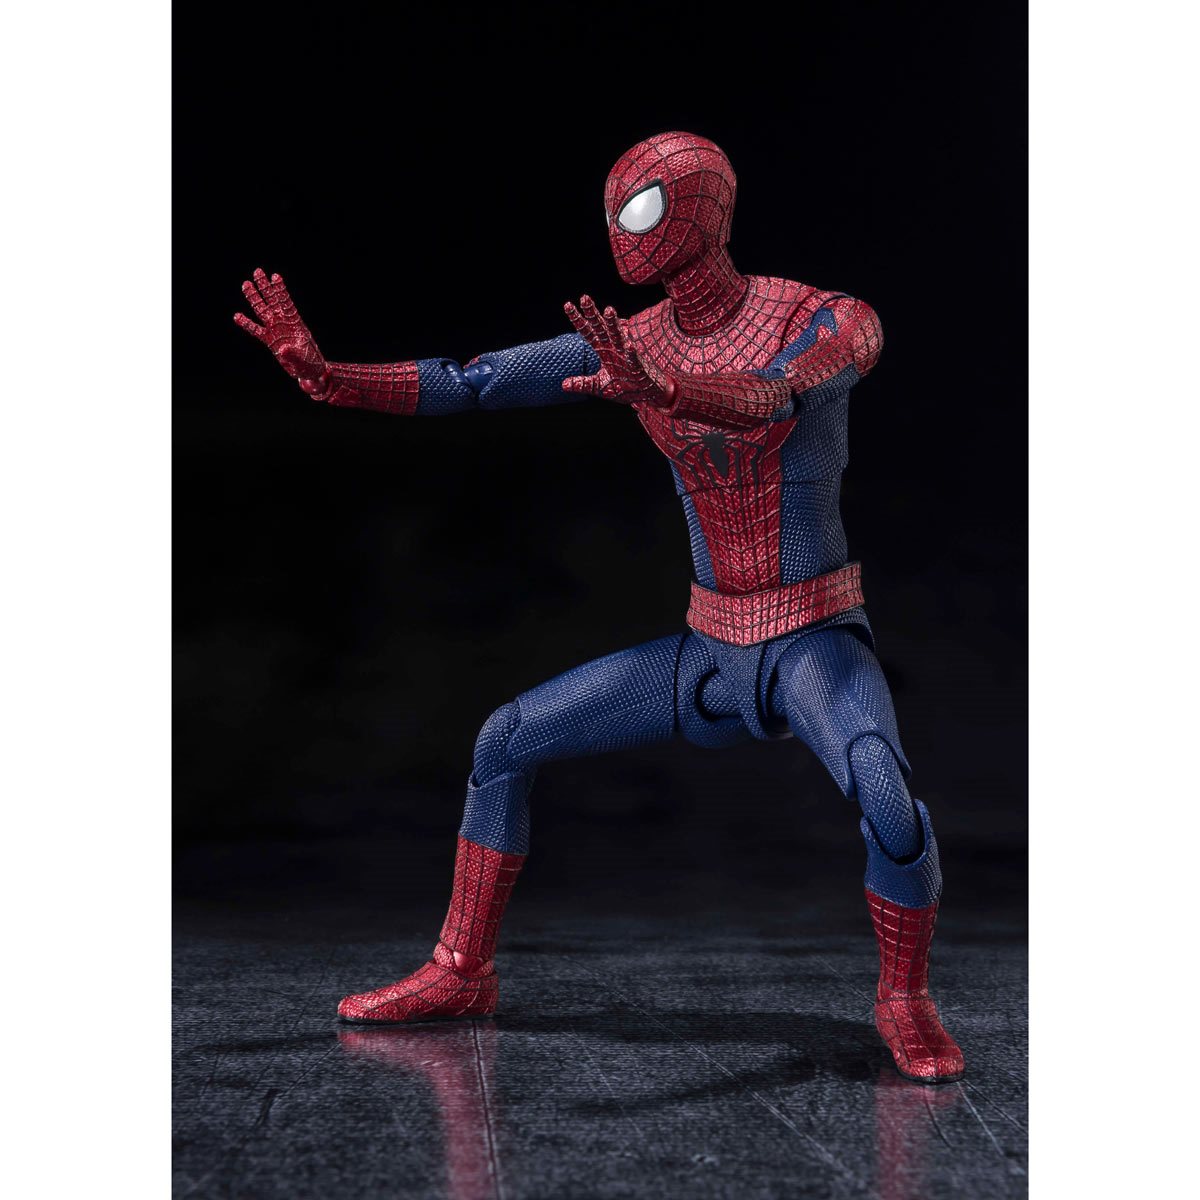 The Amazing Spider-Man Action Figure by SH Figuarts -SH Figuarts - India - www.superherotoystore.com